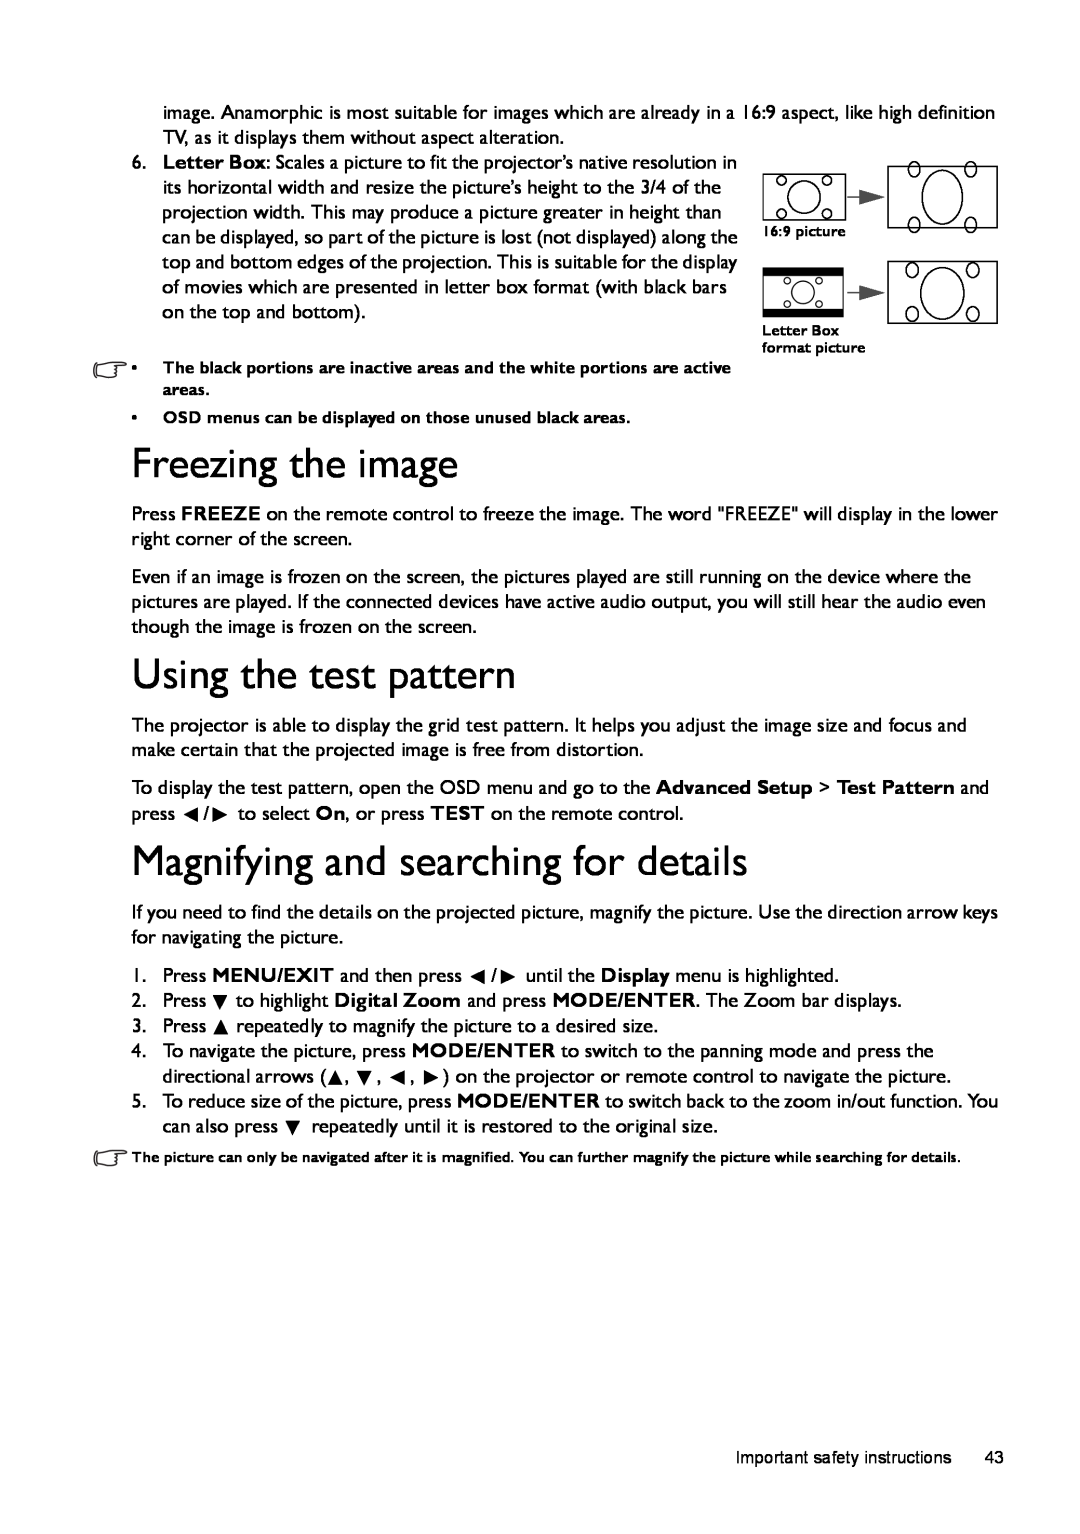 BenQ W1500 user manual Freezing the image, Using the test pattern, Magnifying and searching for details 